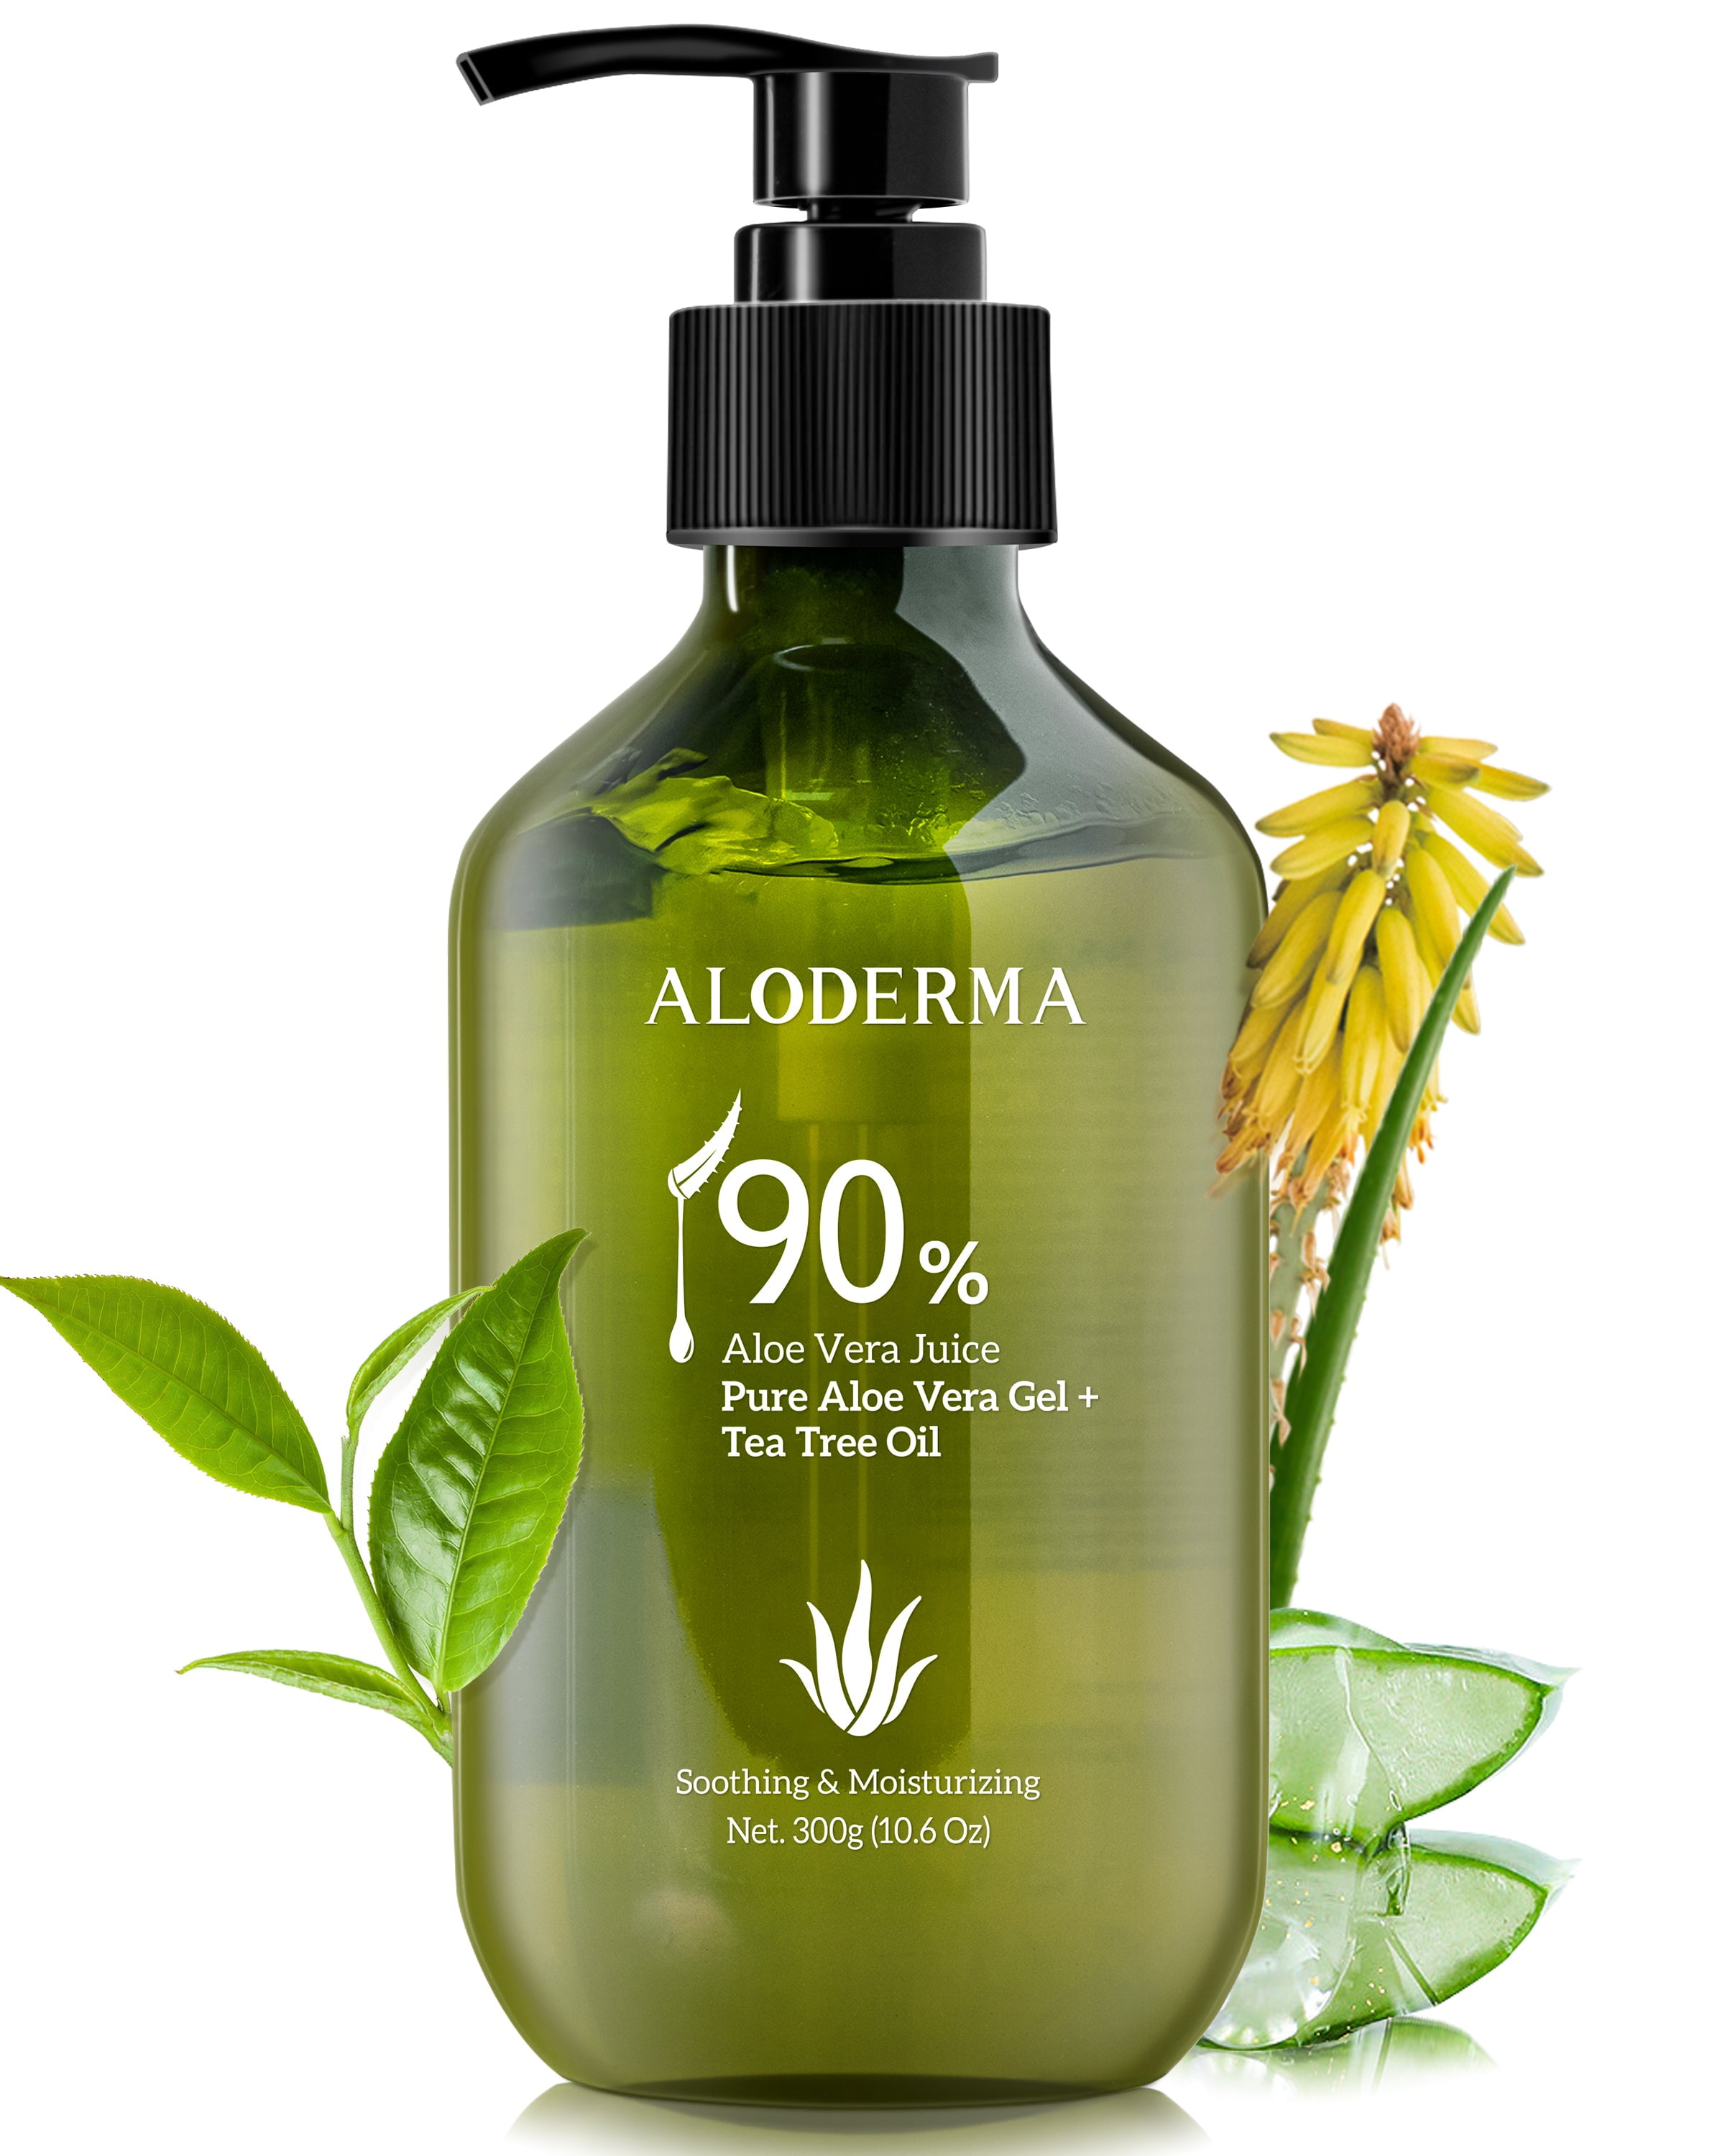 Aloderma Pure Organic Aloe Vera Gel With Tea Tree Oil - Pure Aloe Vera Gel Face - Natural Aloe Vera for Sunburn Treatment, Acne, Aftershave, After Waxing - Aloe